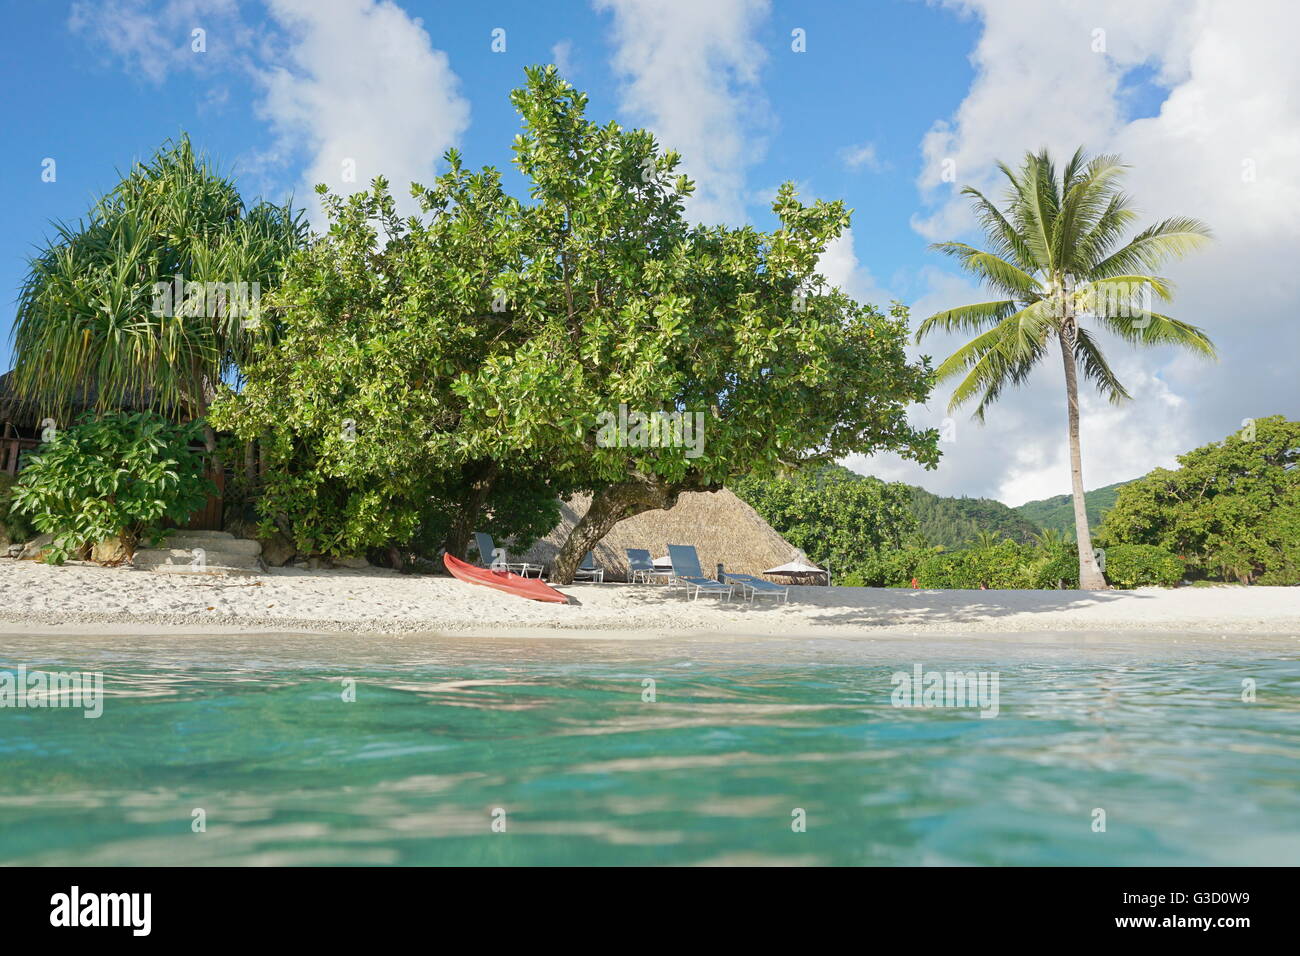 Tropical shore near resort with kayak and lounge chairs on the beach, seen from water surface, Huahine island, French Polynesia Stock Photo